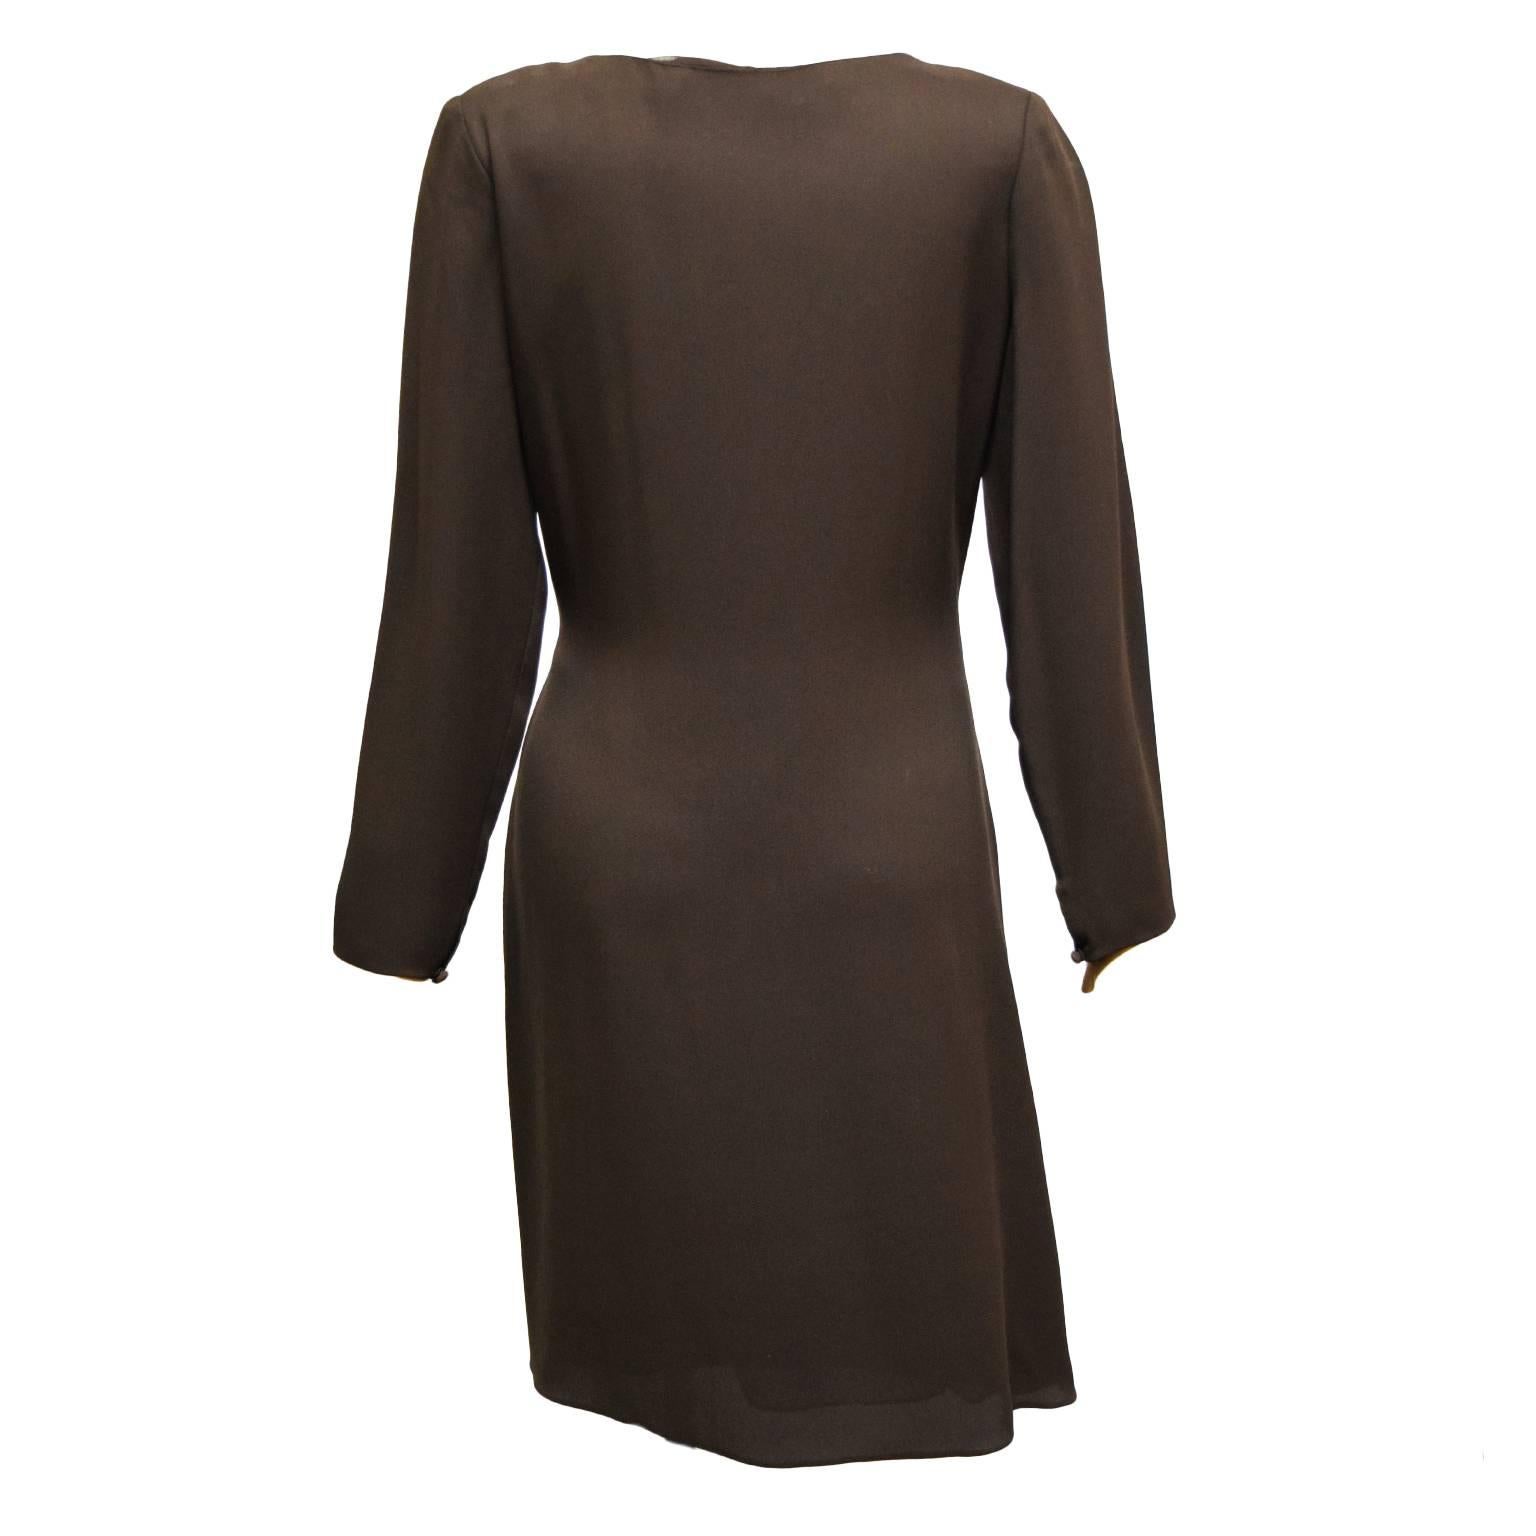 This beautiful Carolina Herrera dress is made of a  rich deep brown and is gathered at the waist to create a slimming illusion. The bodice is sheer silk crepe and has intricate iridescent sequins and glass beading detail.